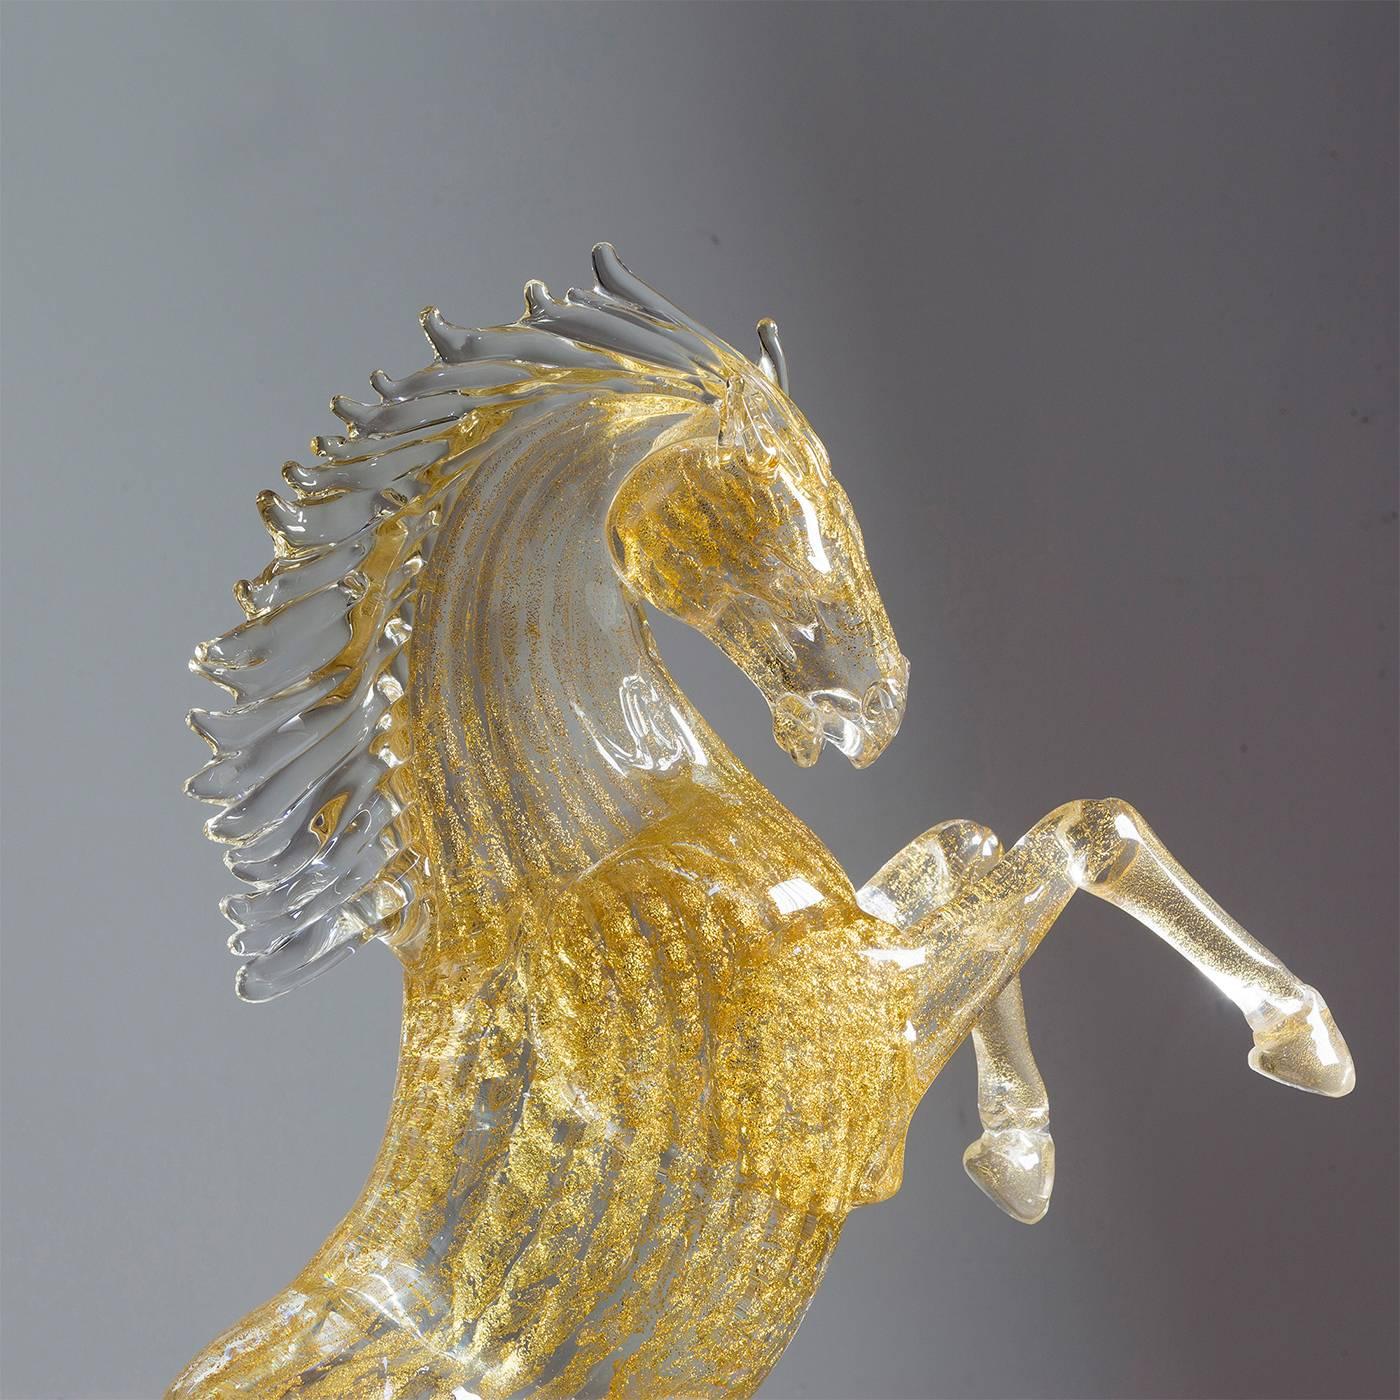 This exceptionally animated small rearing horse is entirely handmade by the master glass blower Zanetti on the island of Murano in Venice. The mane is clear while the body, tail and hooves have 24-karat gold leaf throughout. Make a dramatic